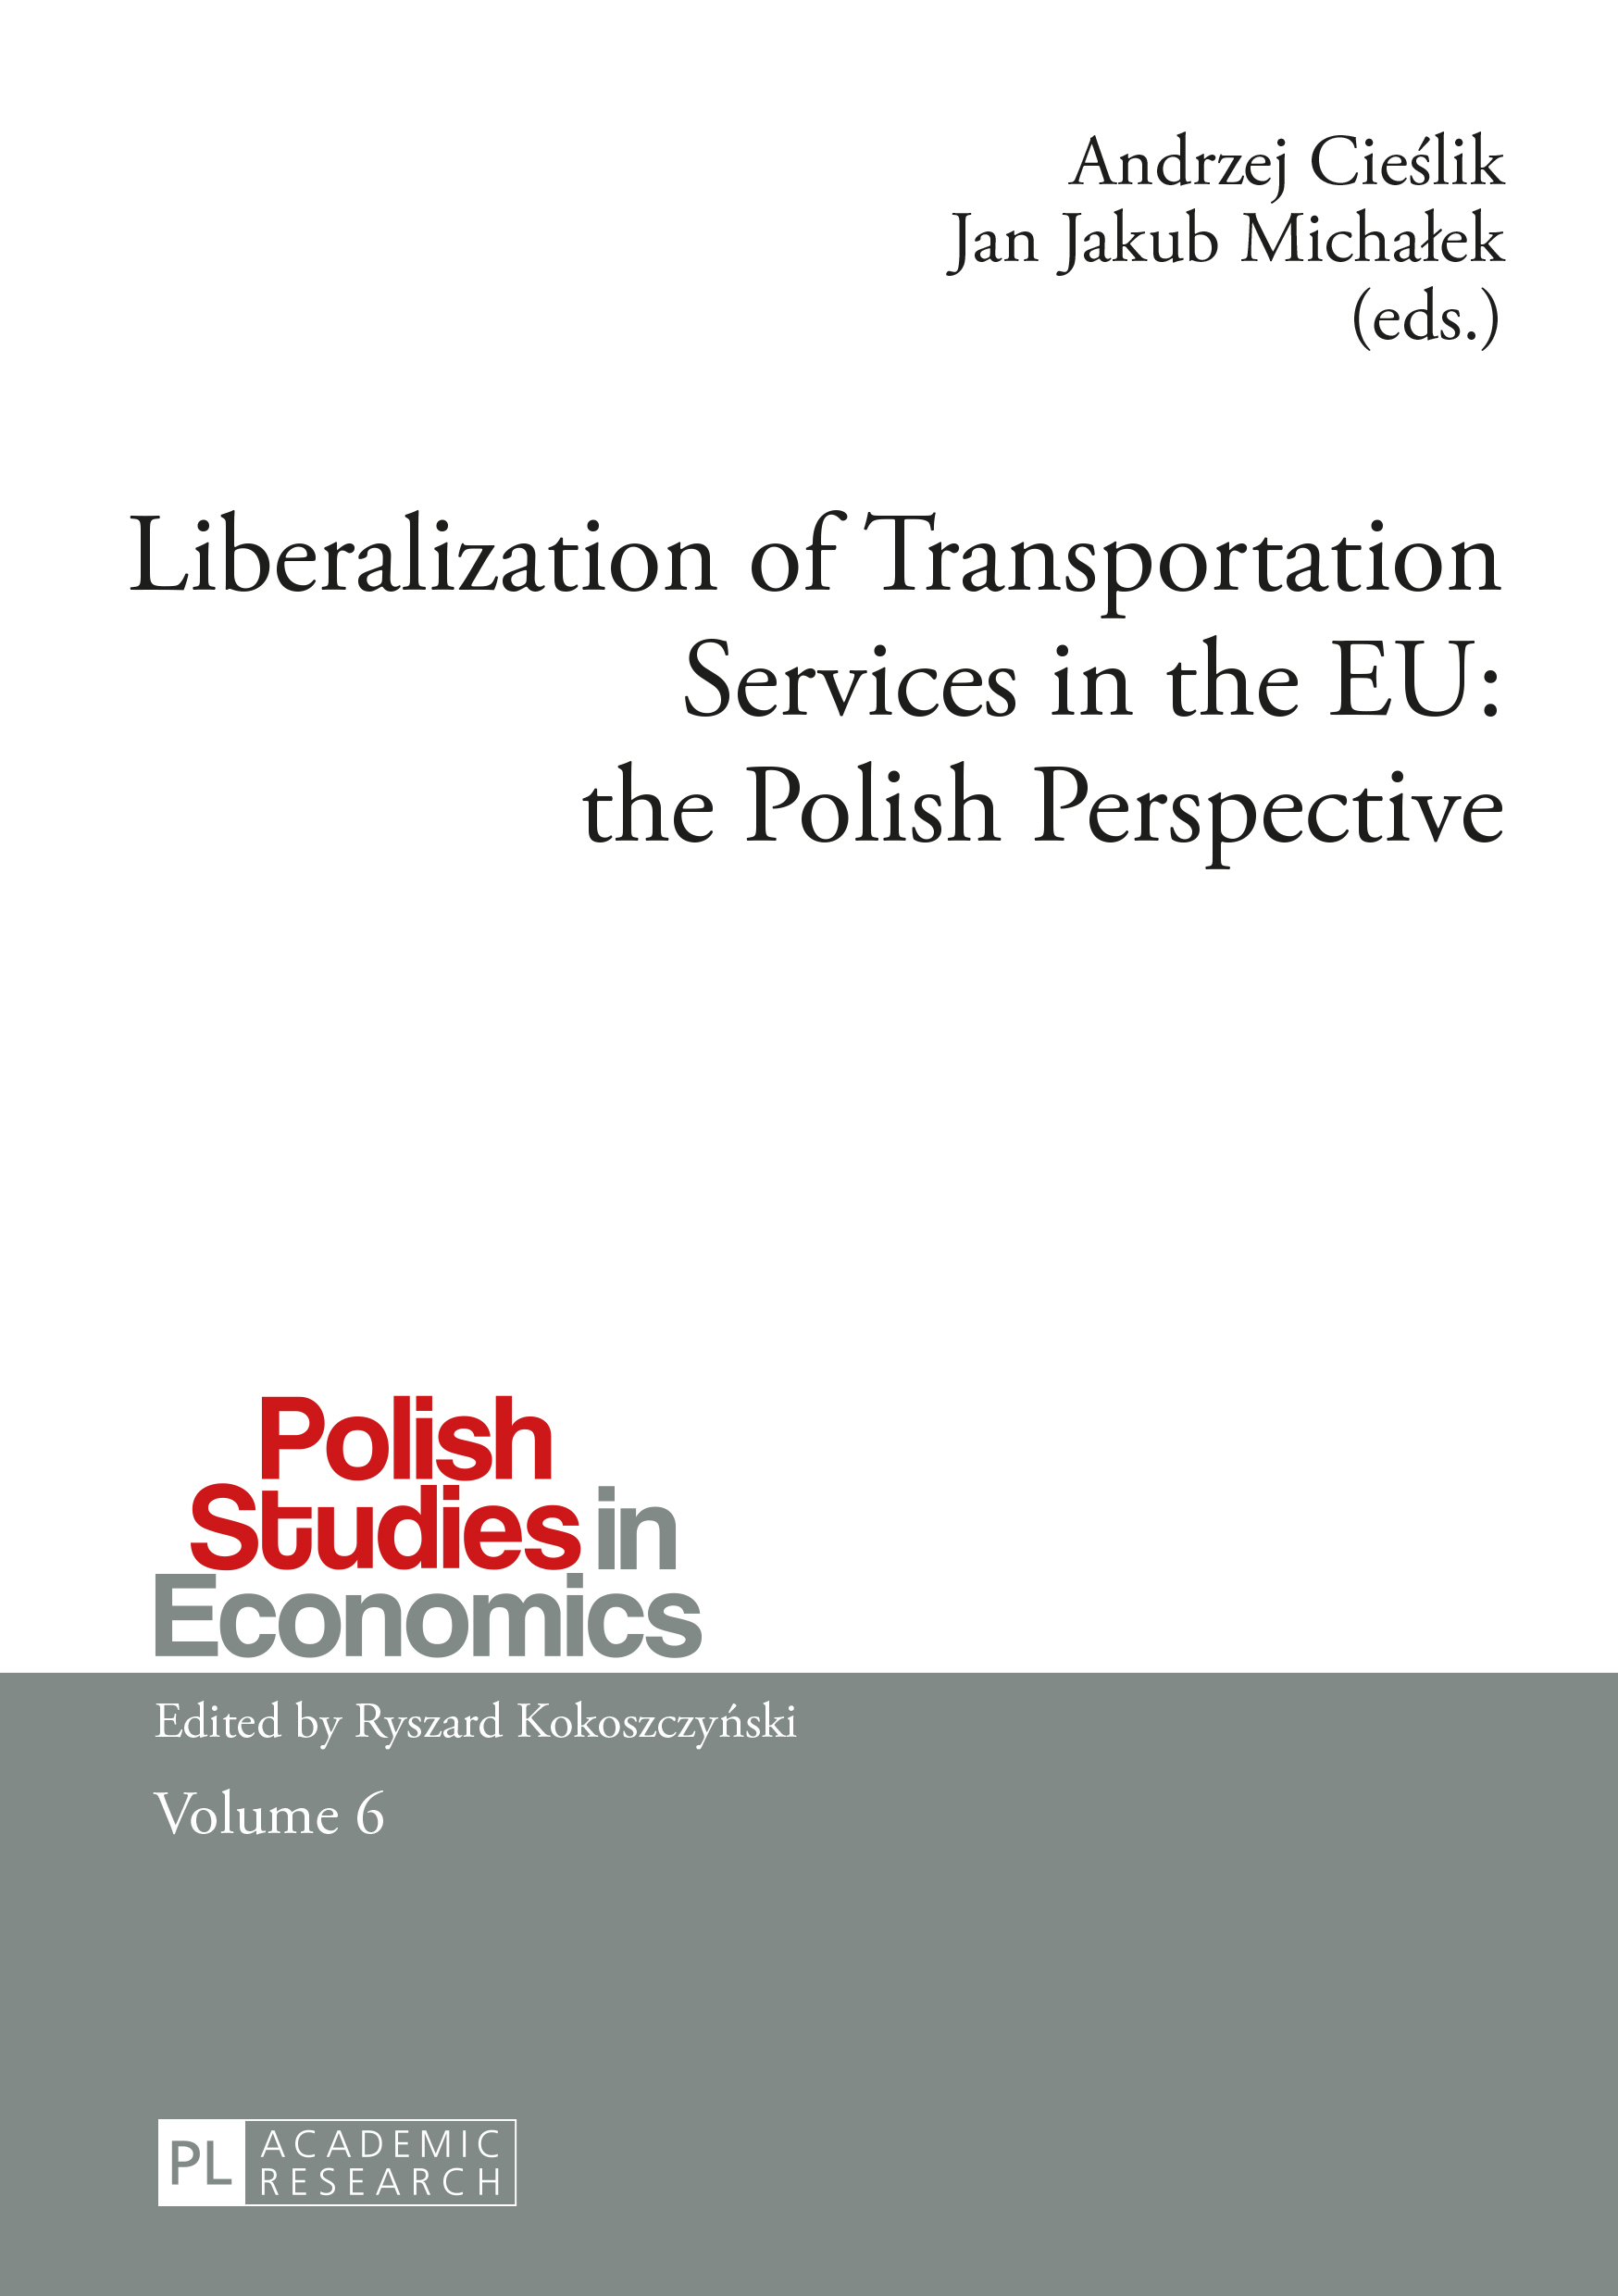 Liberalization of Transportation Services in the EU